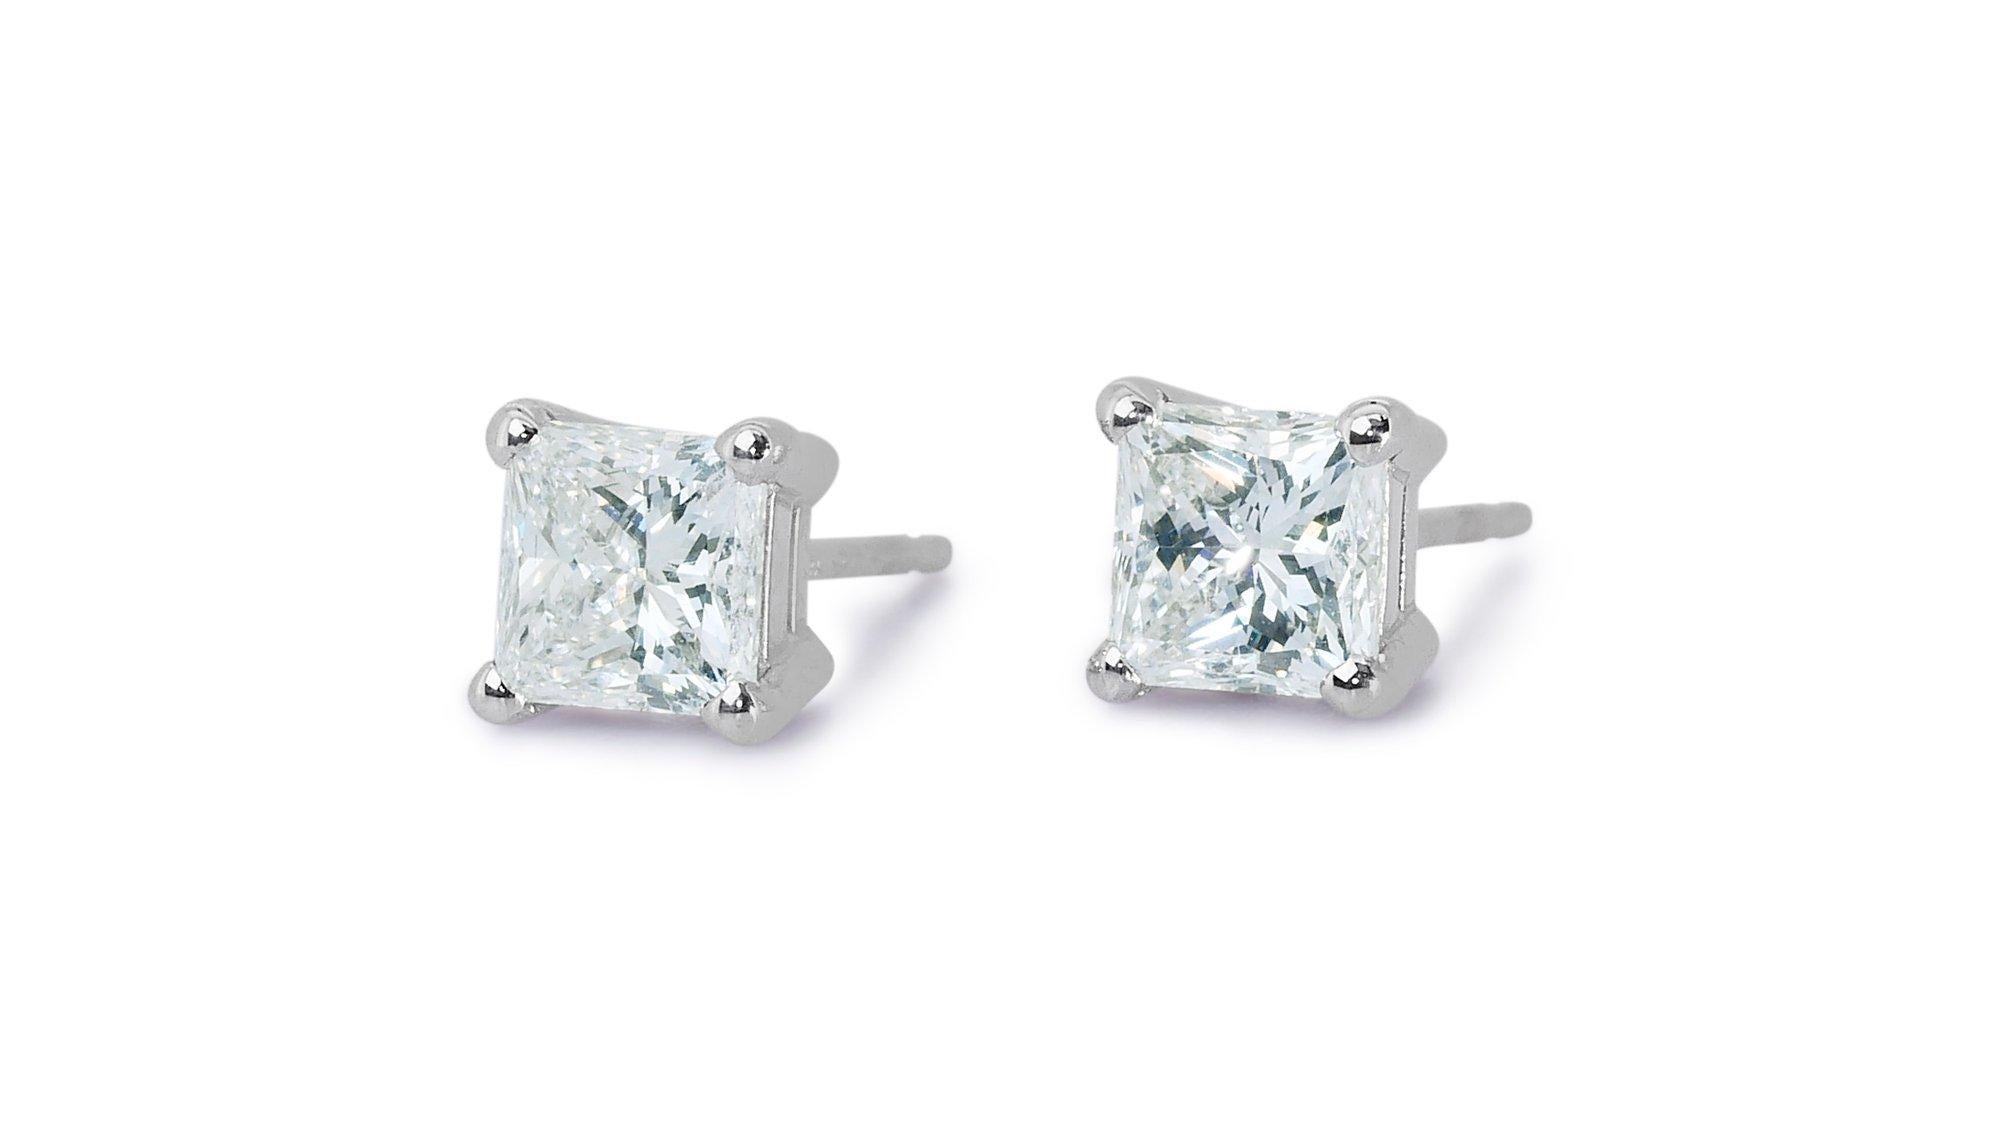 Square Cut Classic 2.00ct Diamond Stud Earrings in 18k White Gold - GIA Certified For Sale